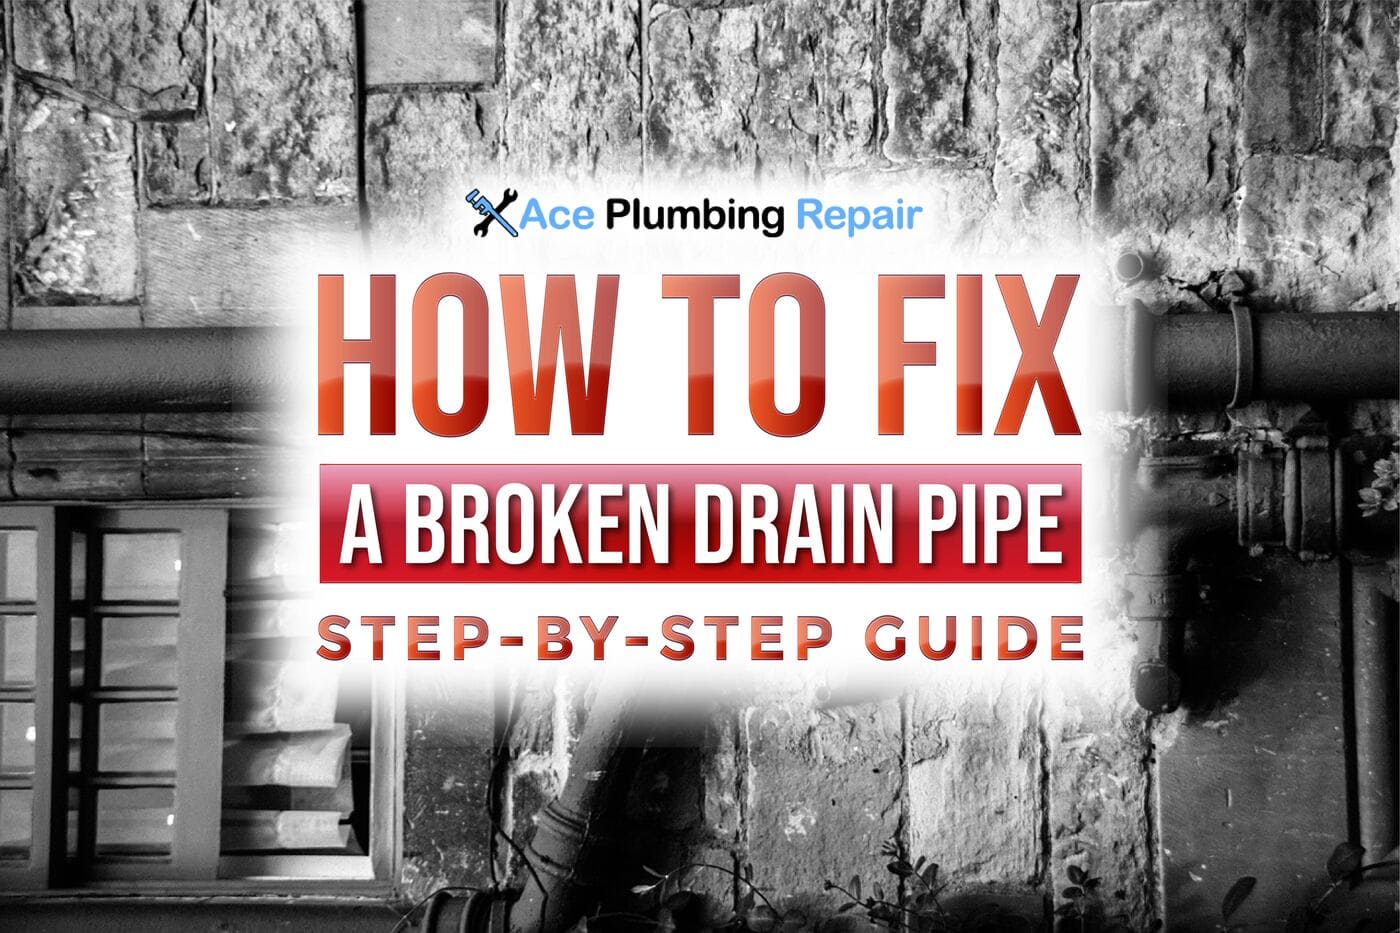 How To Fix A Broken Drain Pipe